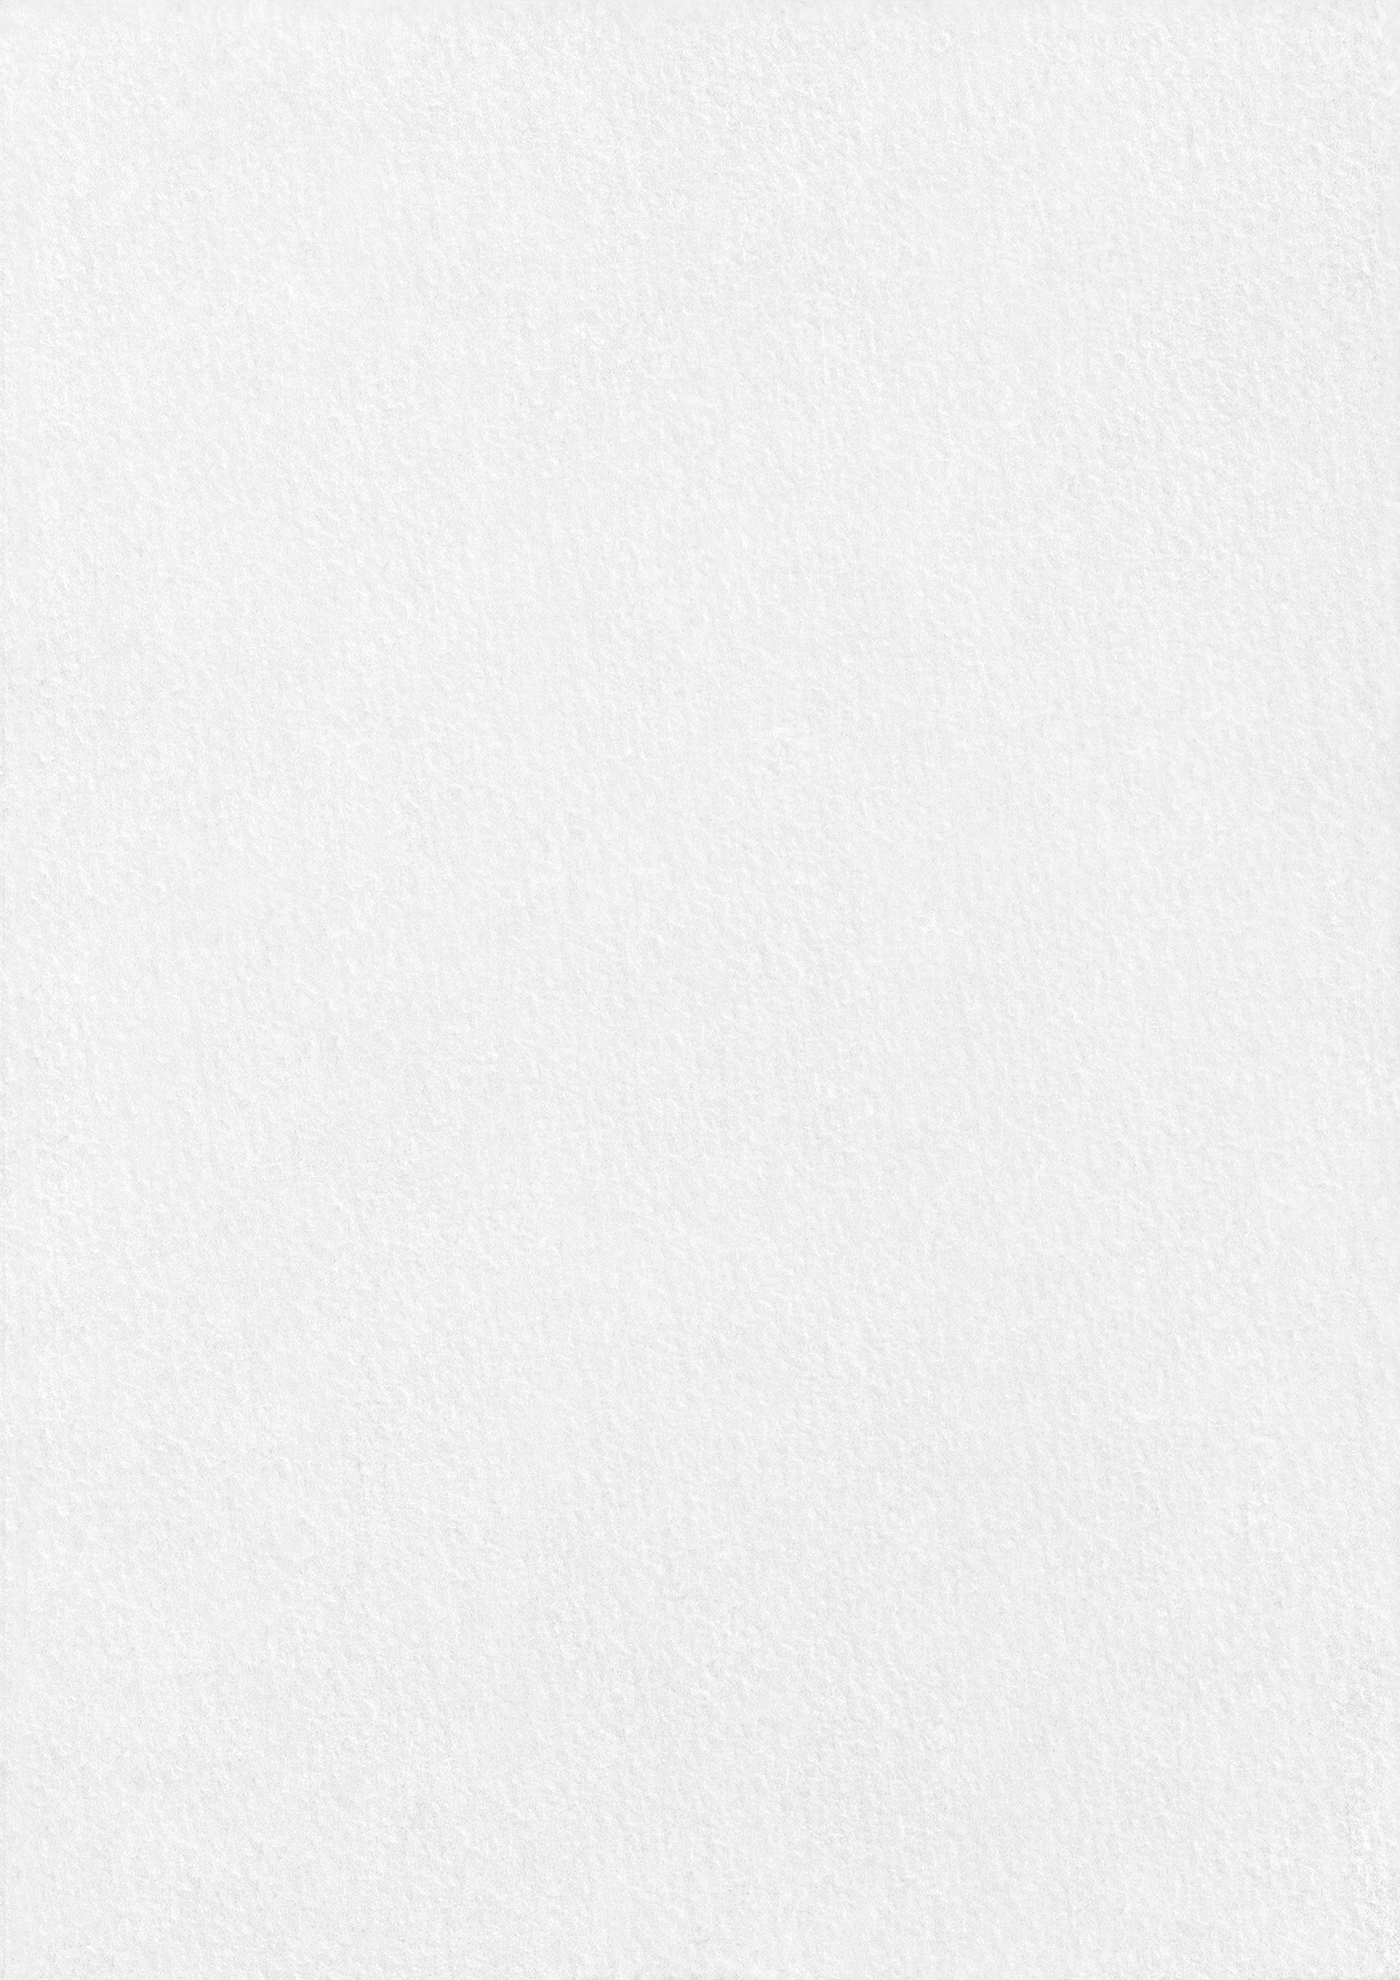 paper textures backgrounds White white paper